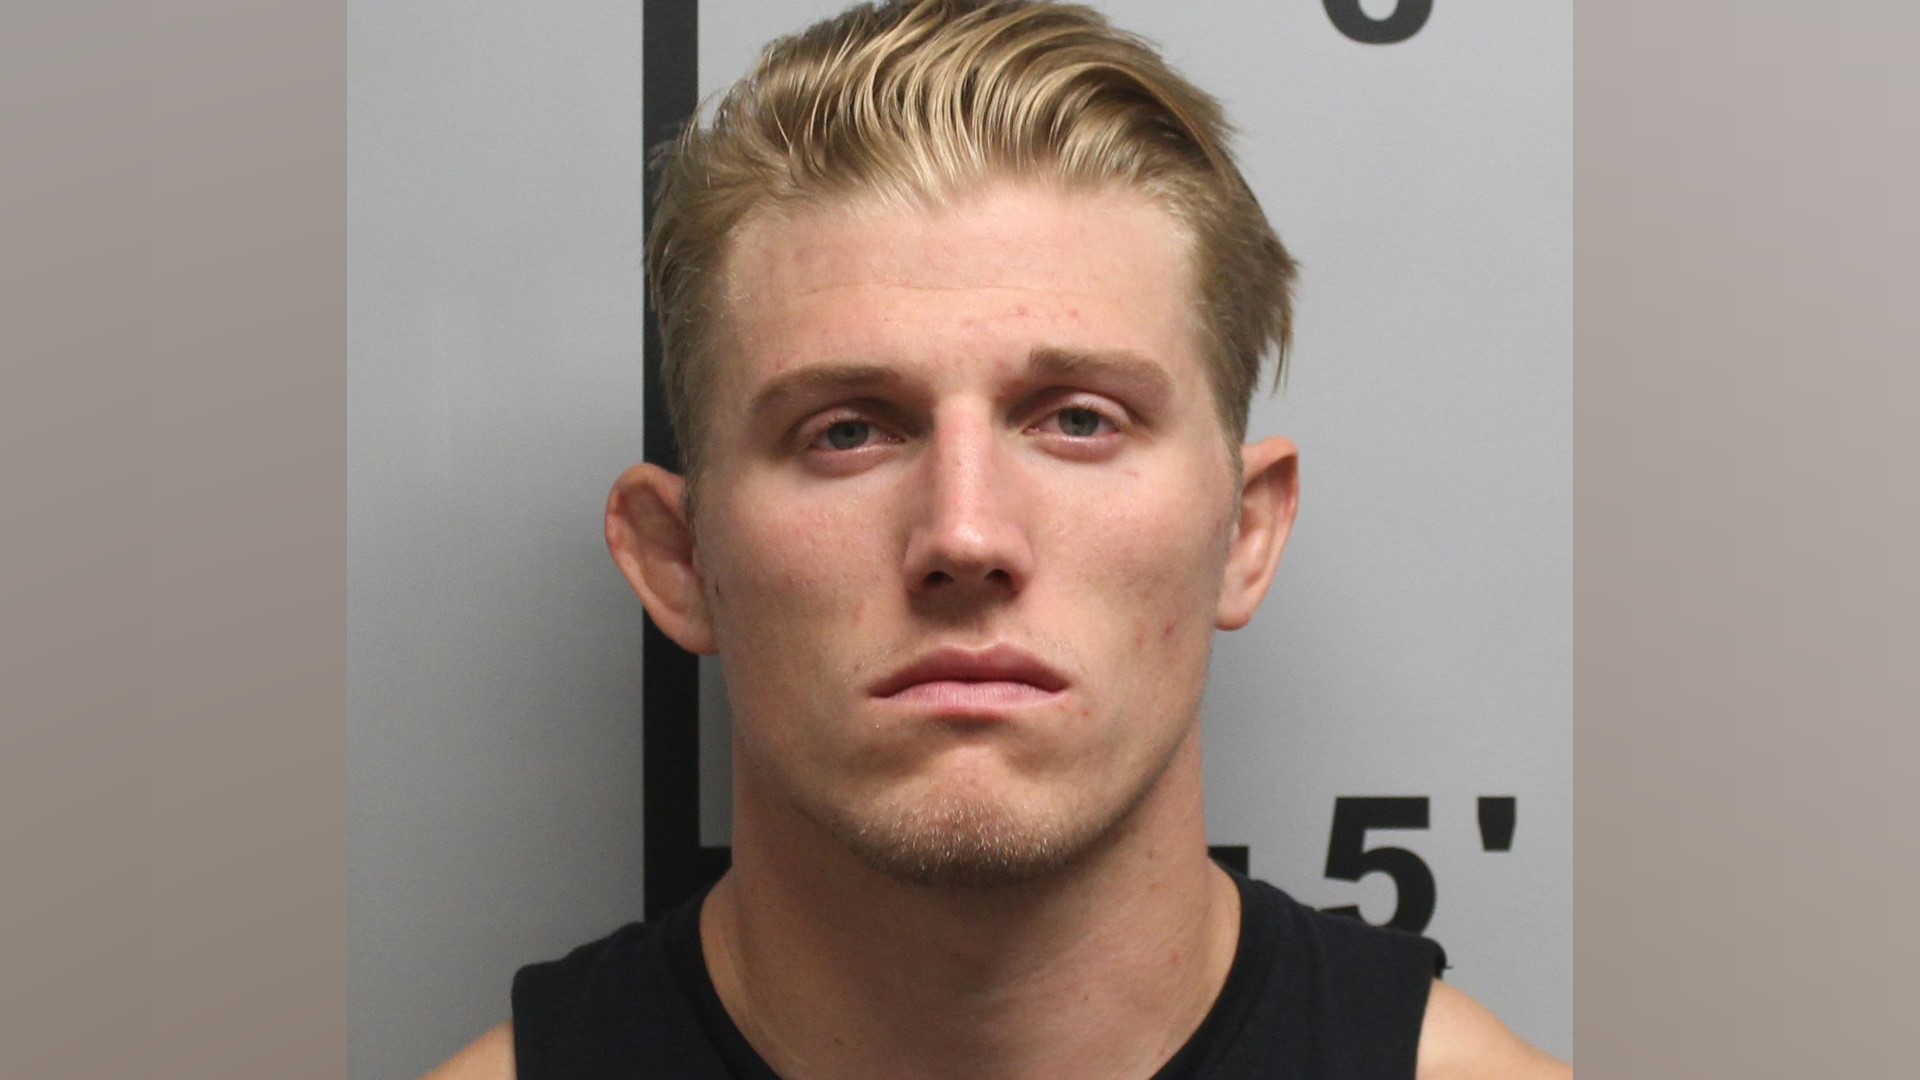 Former Rogers High School wrestling coach Colton Looper was arrested on one charge of sexual assault.